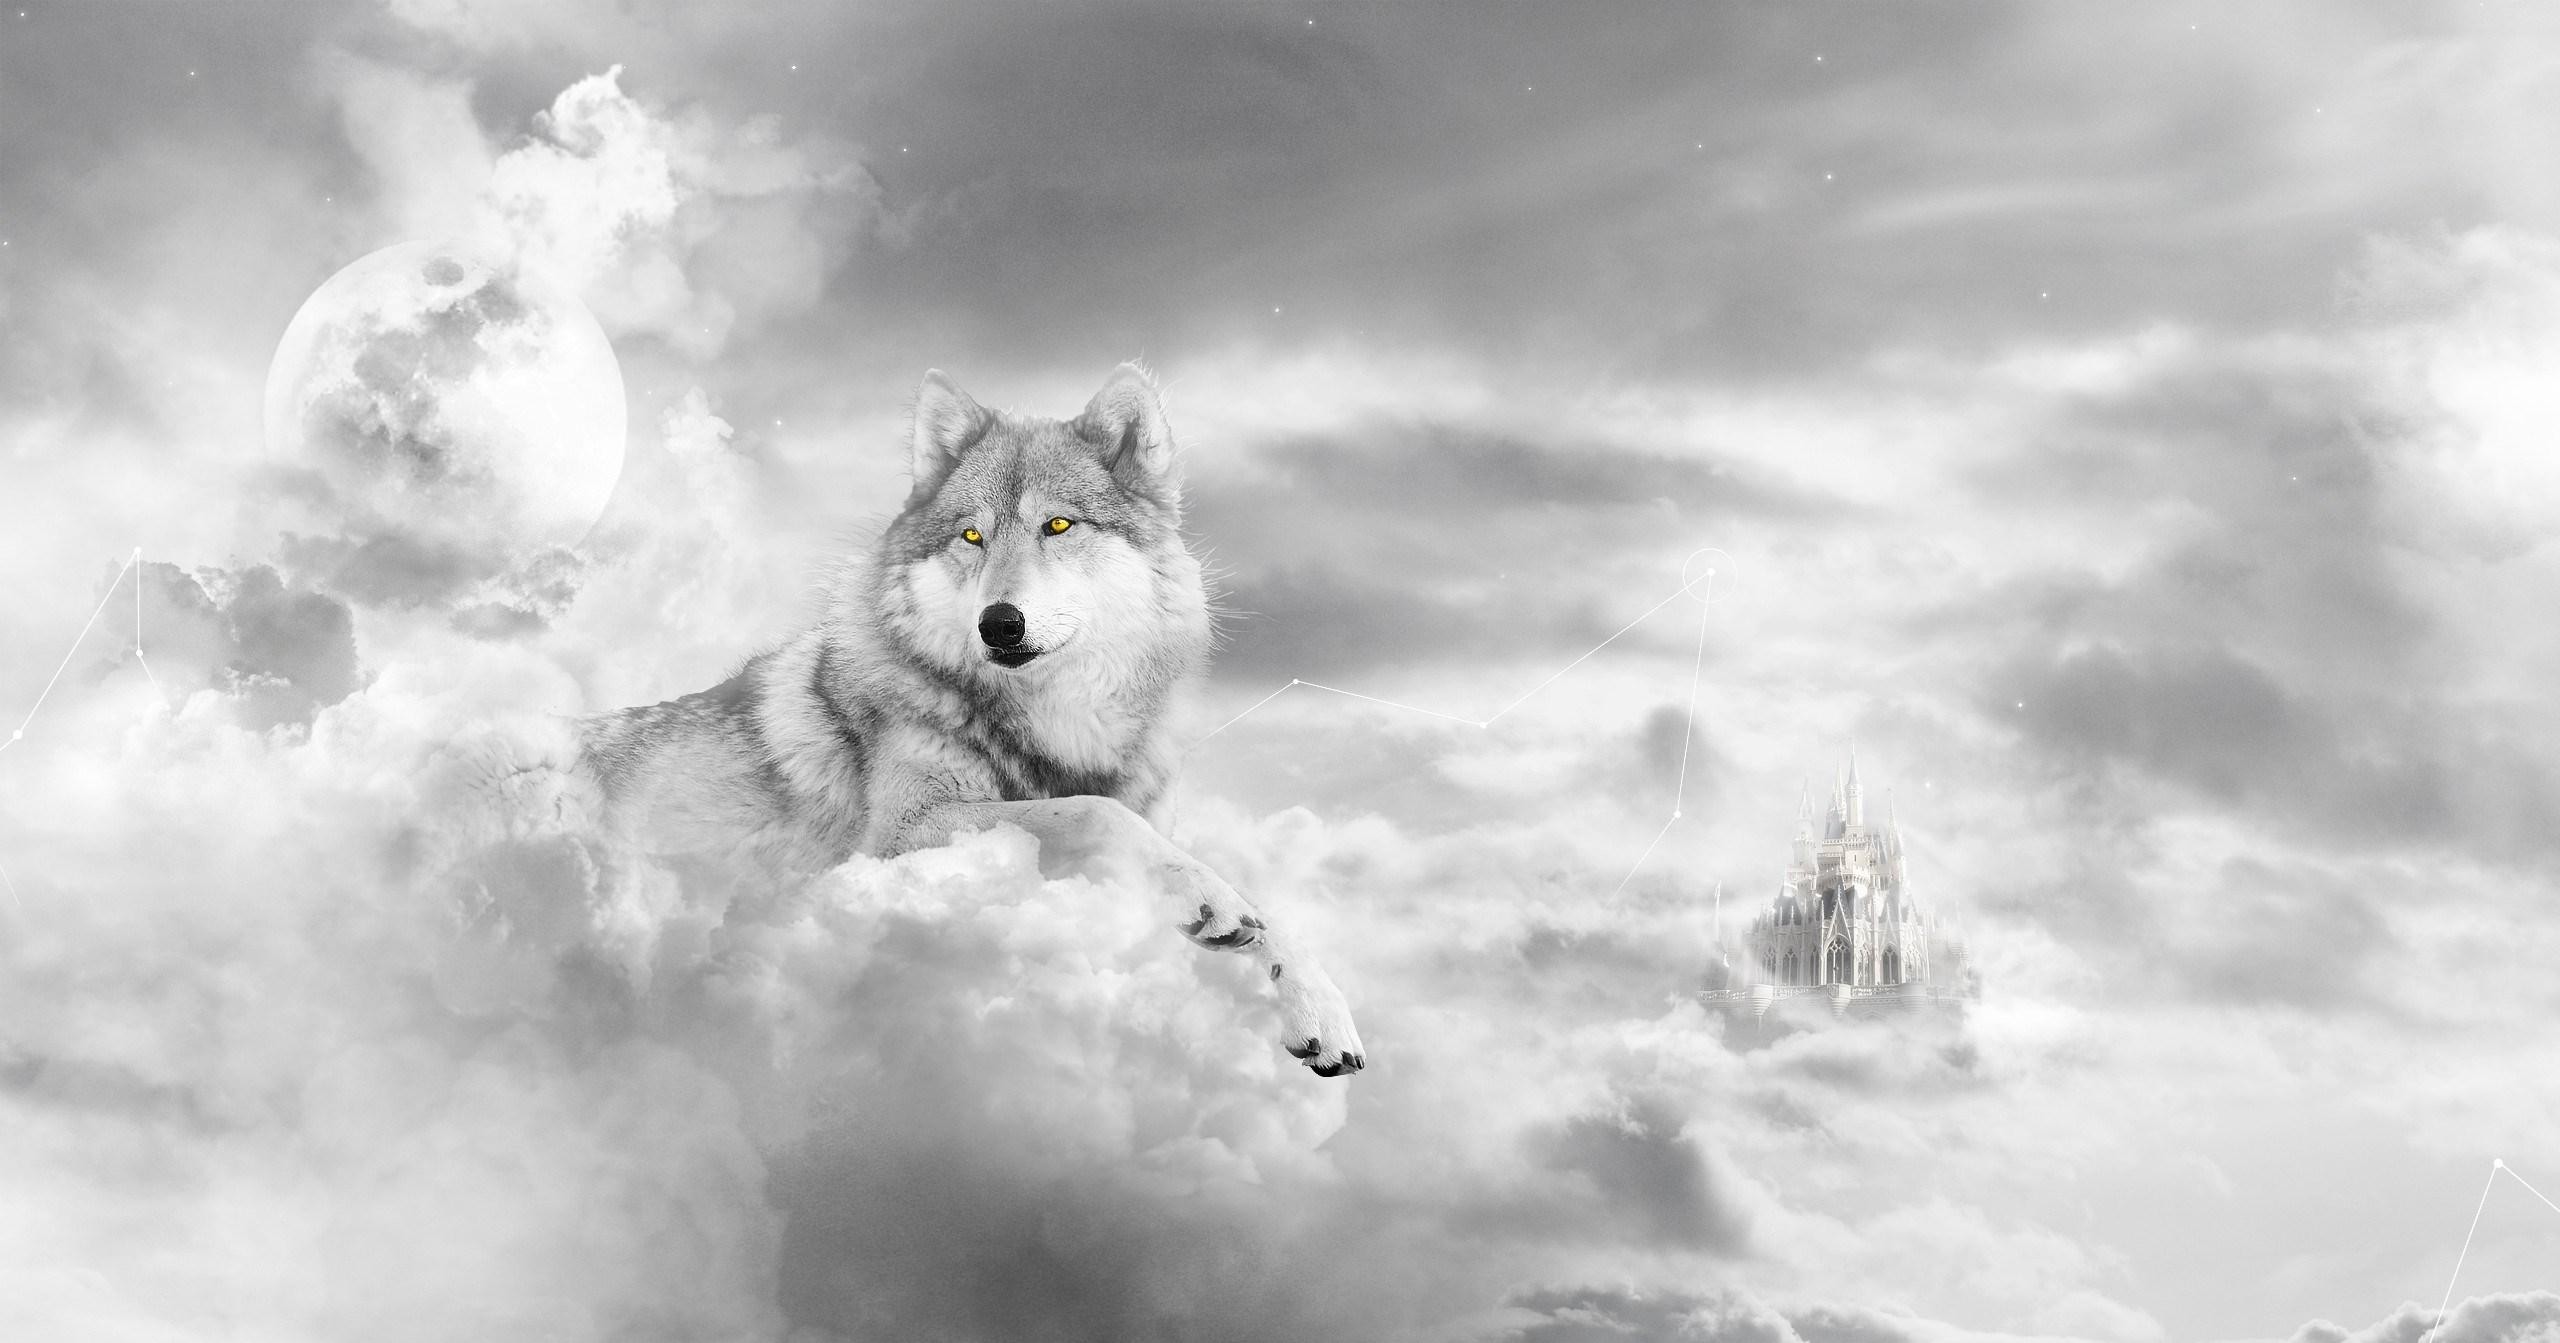 cool wolf in the clouds wallpaper Check more at https://www.finewallpapers